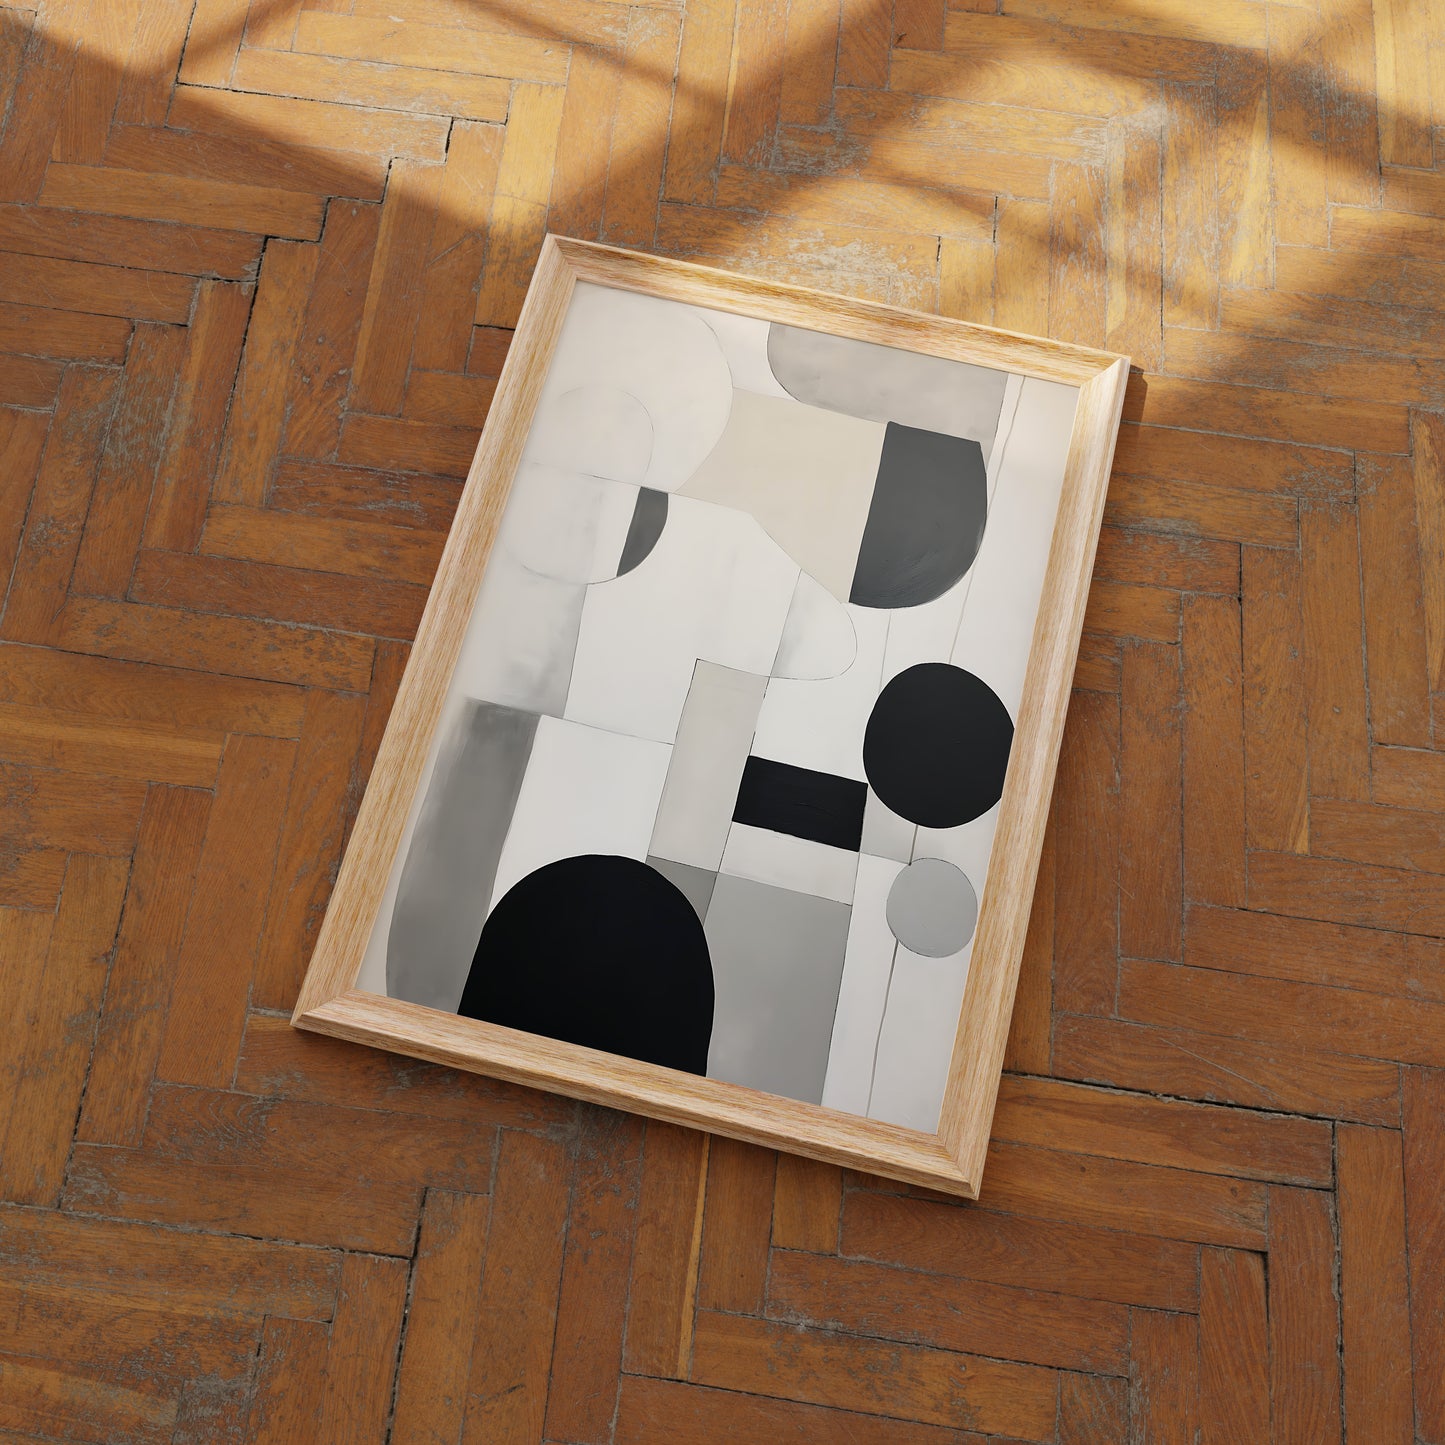 An abstract painting with geometric shapes on a wooden floor.